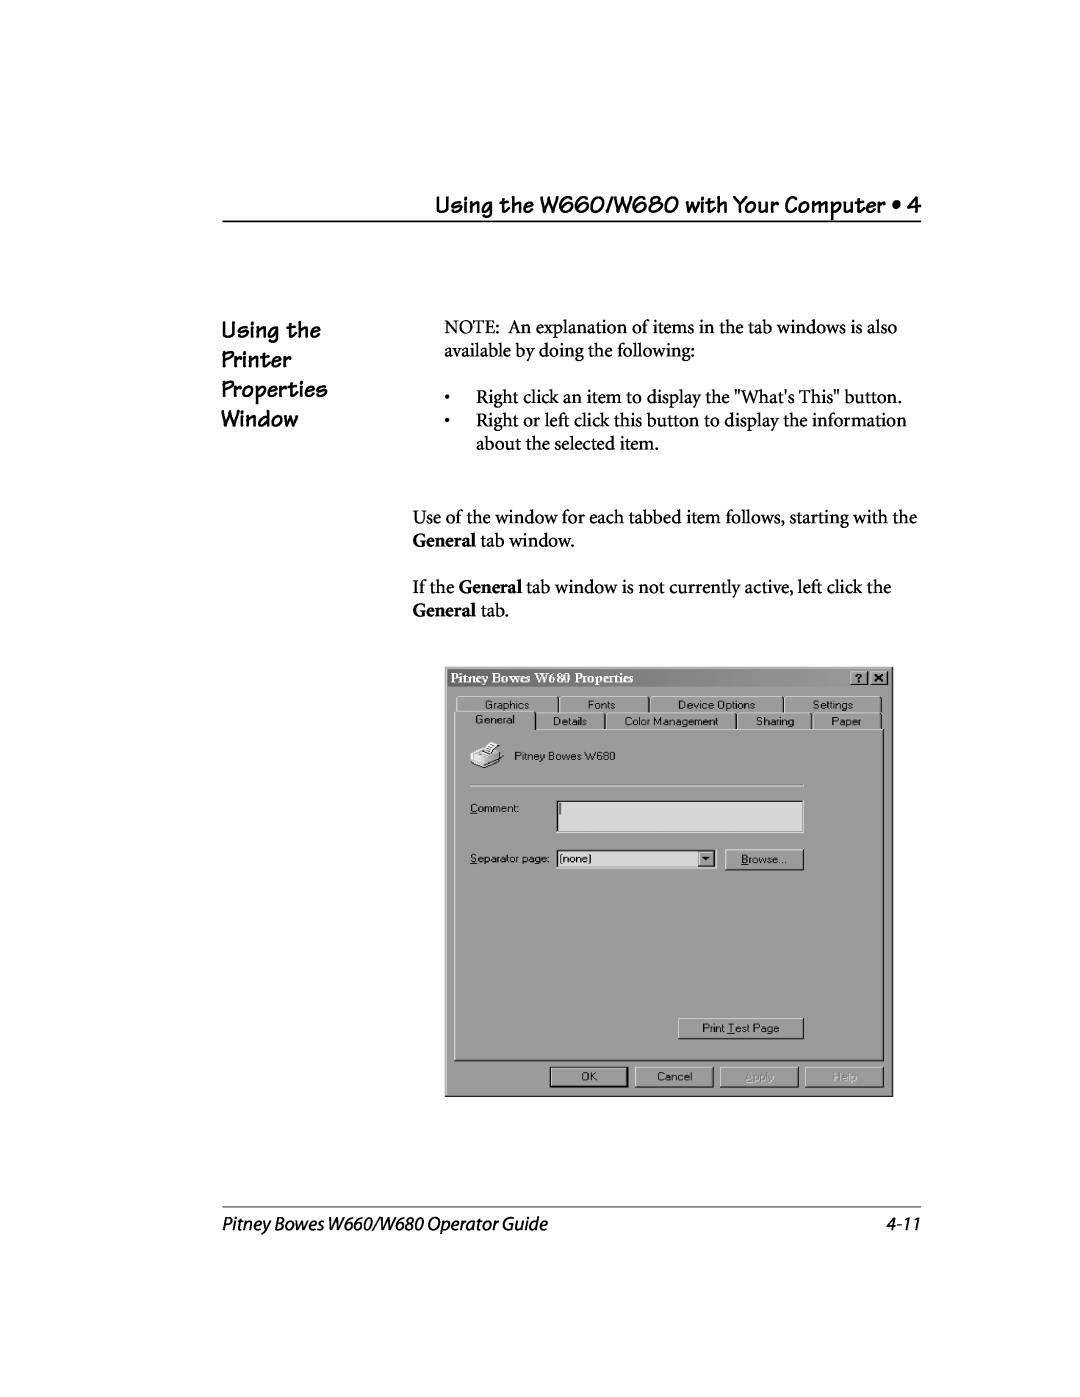 Pitney Bowes manual Using the Printer Properties Window, 4-11, Using the W660/W680 with Your Computer 